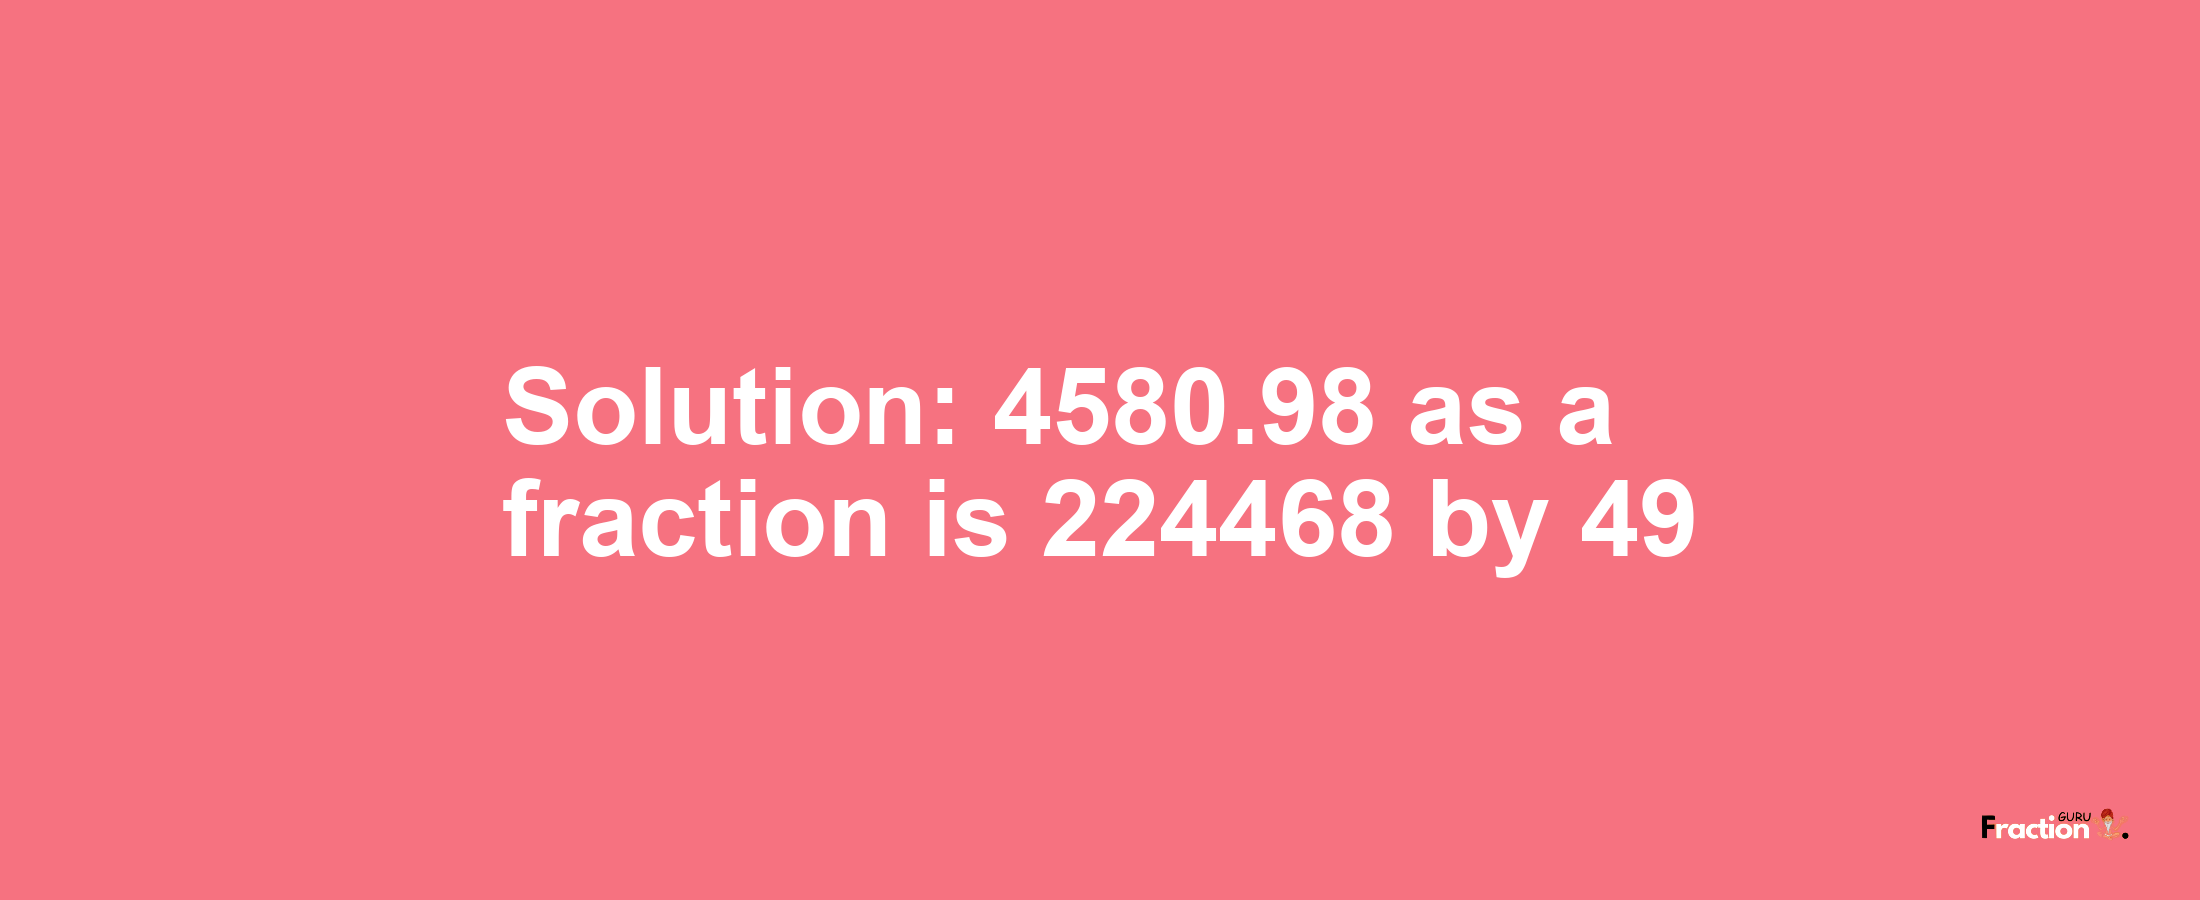 Solution:4580.98 as a fraction is 224468/49